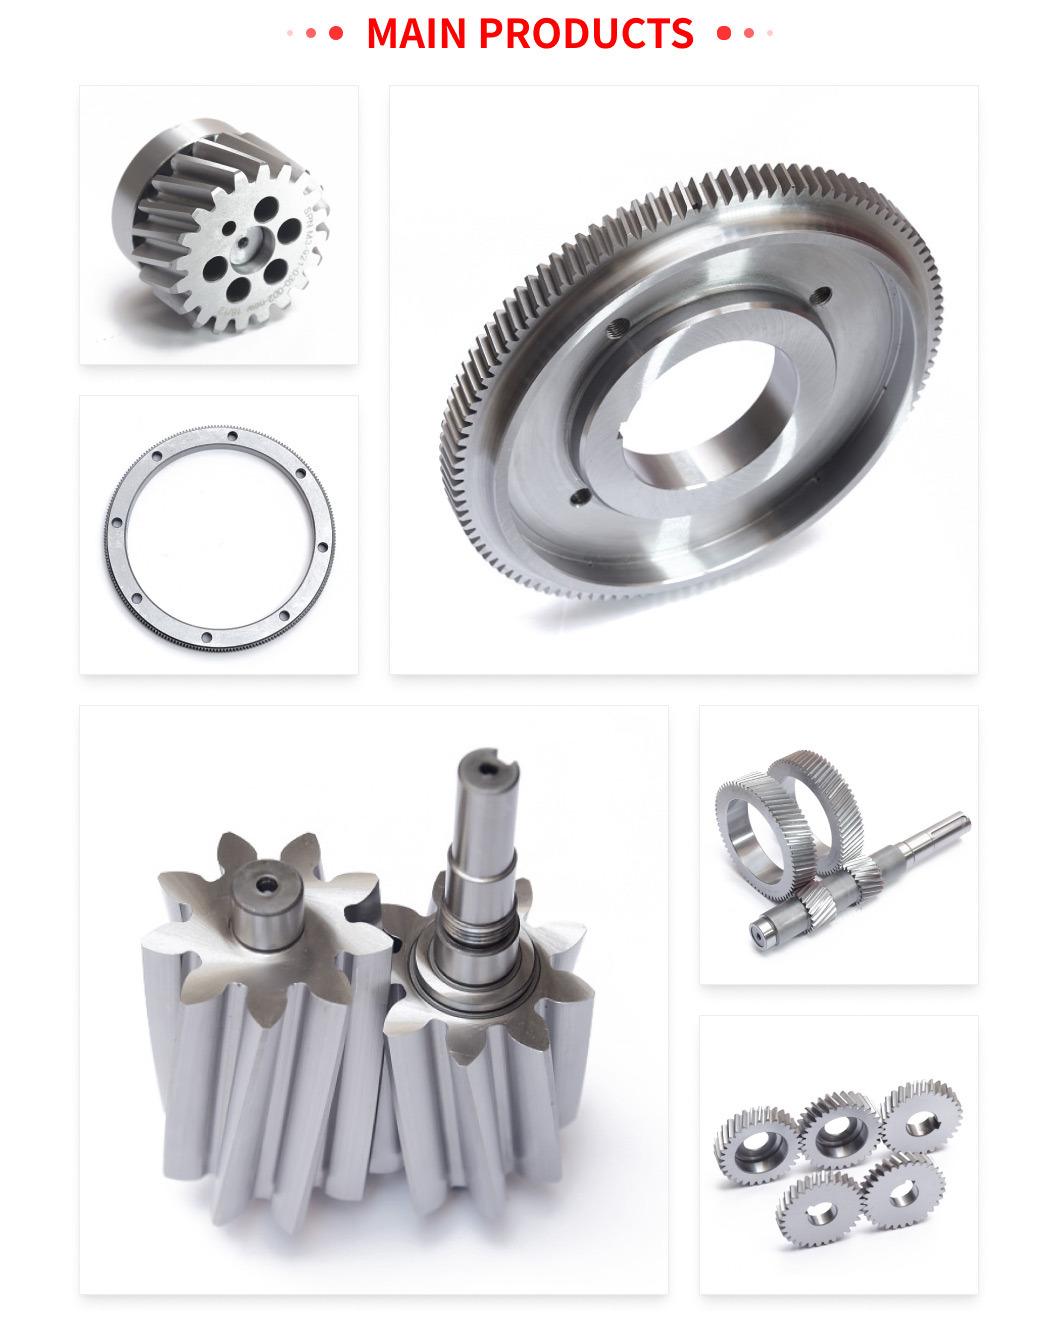 Circular Machinery OEM Gears Spur Cement Mixer Cylindrical Transmission Gear with Factory Price